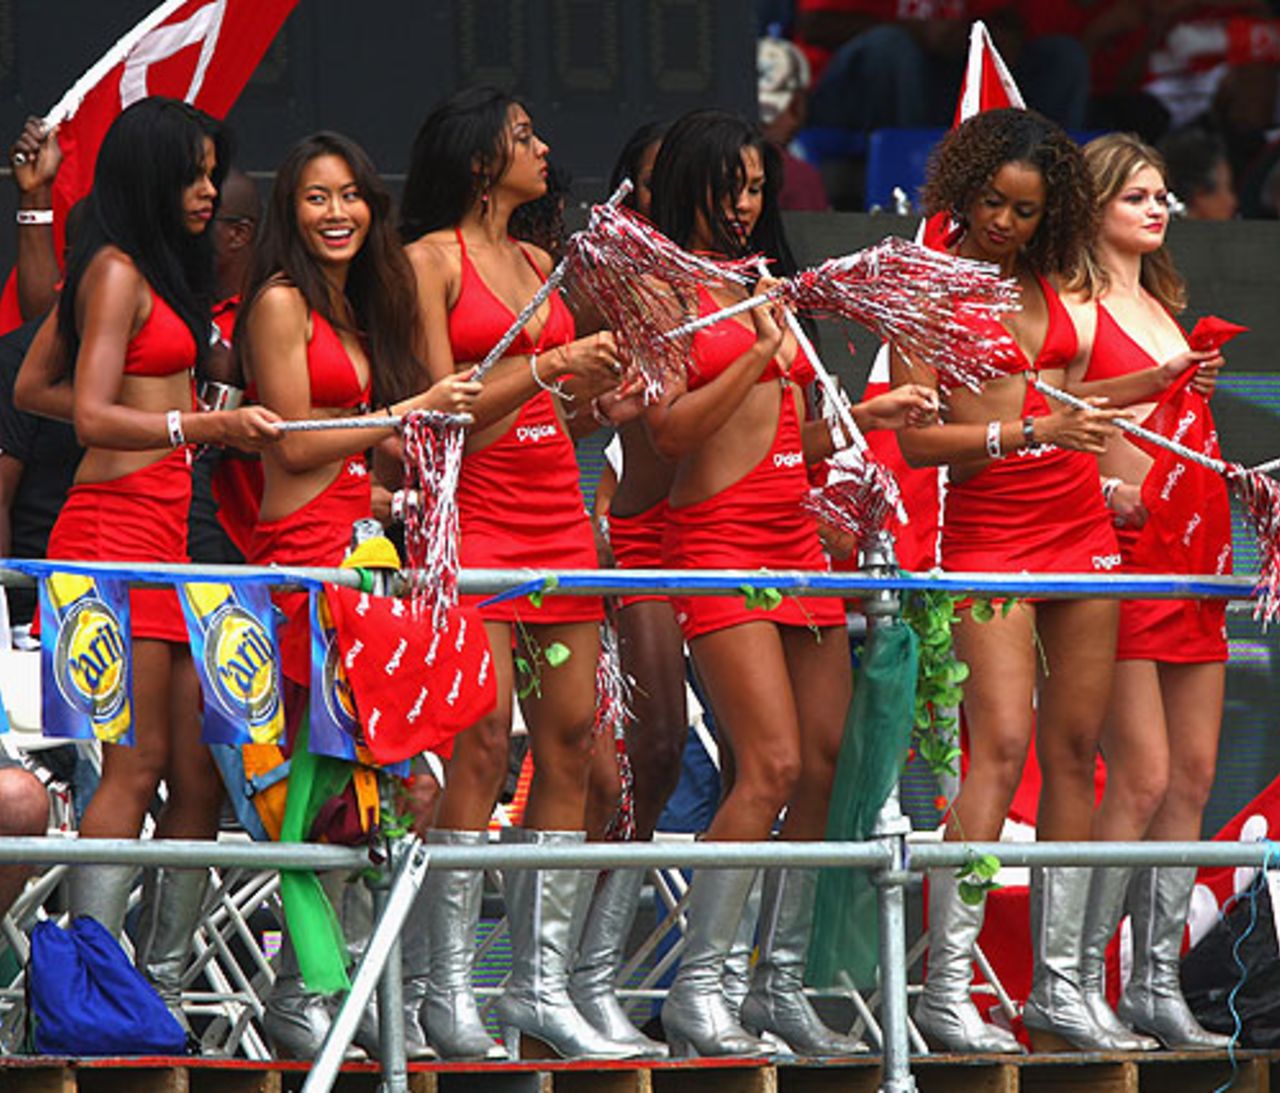 Dancing girls keep the crowd entertained at the Queen's Park Oval, West Indies v England, Twenty20 international, Trinidad, March 15, 2009